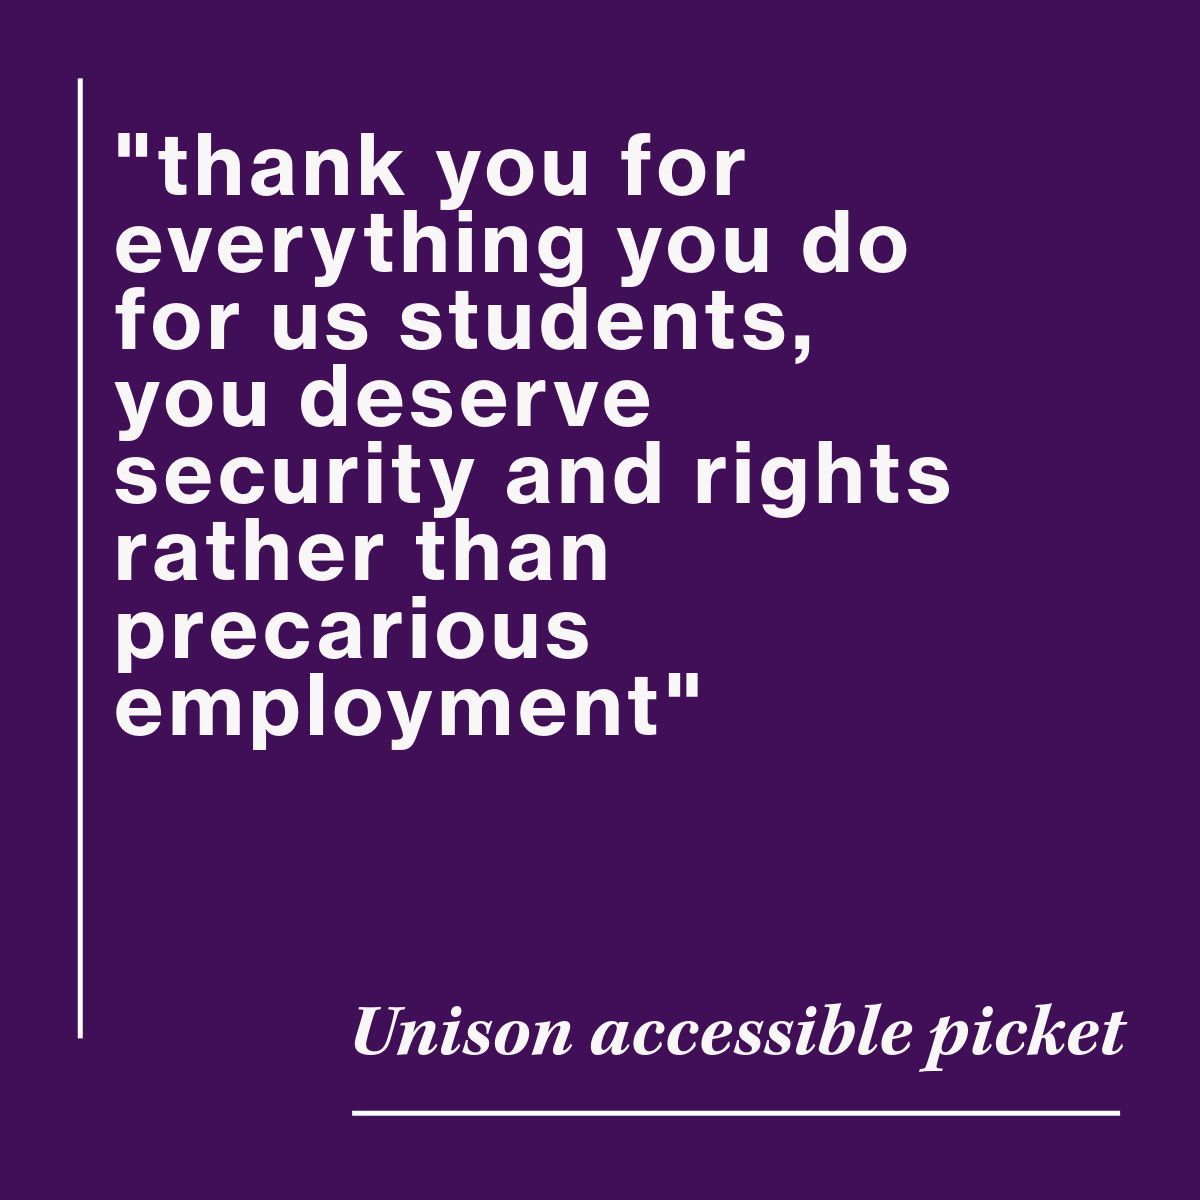 Students and staff, standing together ✊ [img: quote from accessible picket “thank you for everything you do for us students, you deserve security and rights rather than precarious employment”]